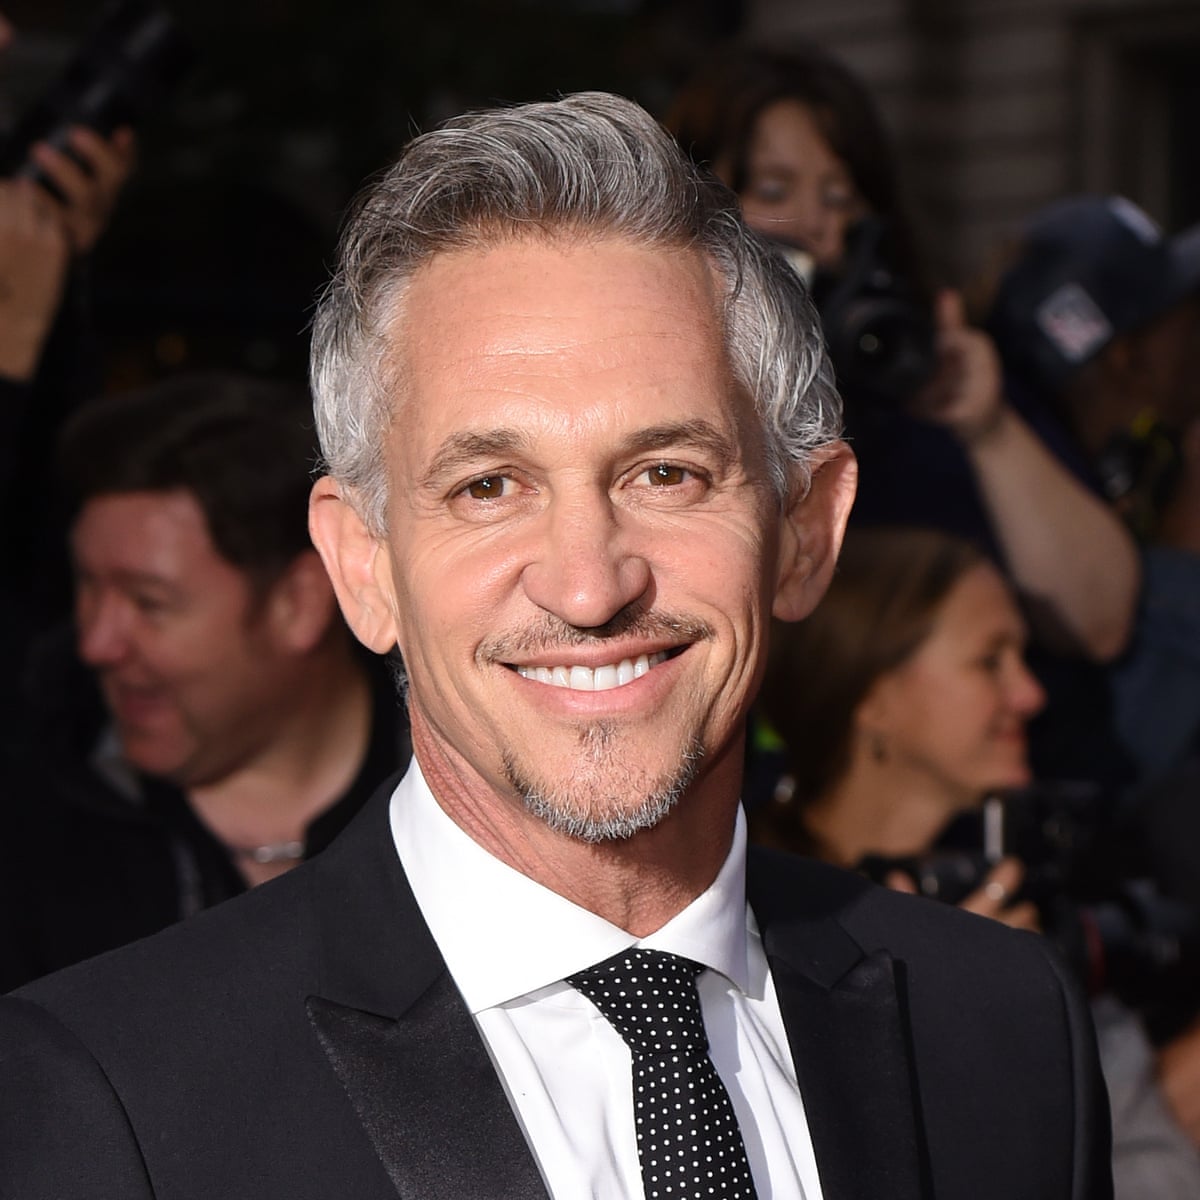 Gary Lineker hits back at Daily Mail over tax accusation | Gary Lineker |  The Guardian